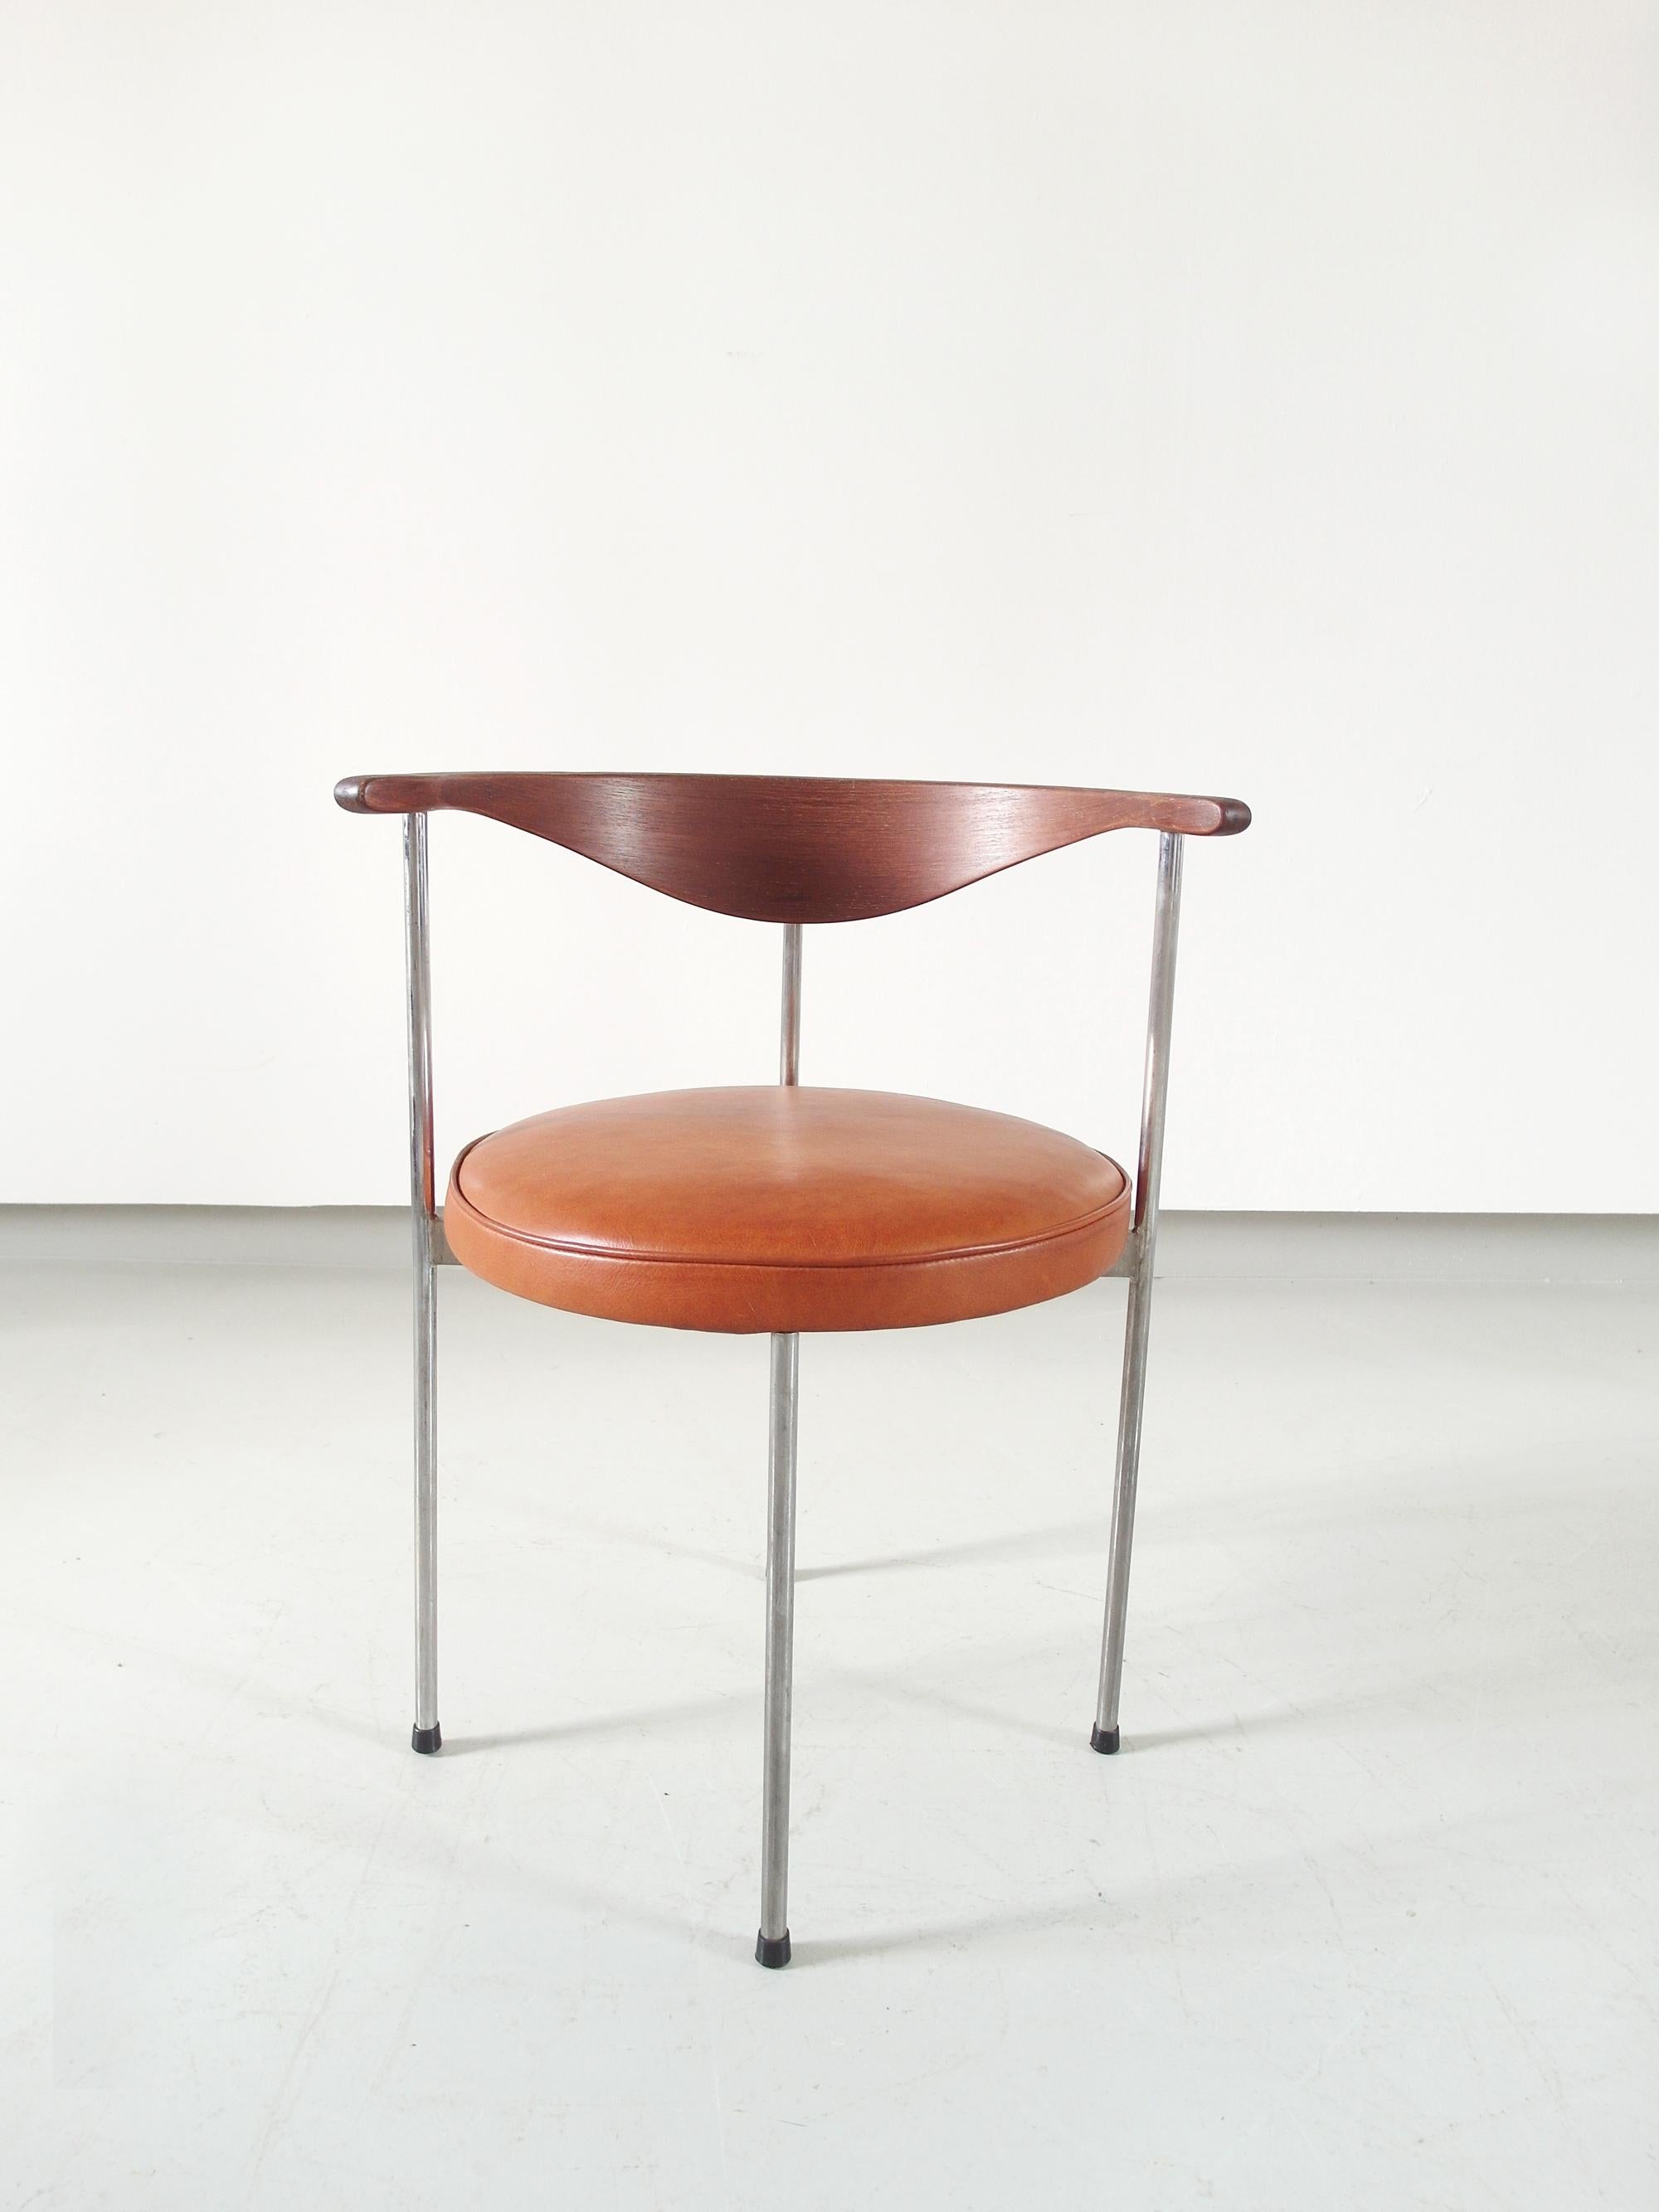 Desk or side chair designed by Frederik Sieck for Fritz Hansen in Denmark in the 1962. This Minimalist round shaped chair features an elegantly curved backrest. The round seat is upholstered in cognac aniline leather, being beautifully complimented